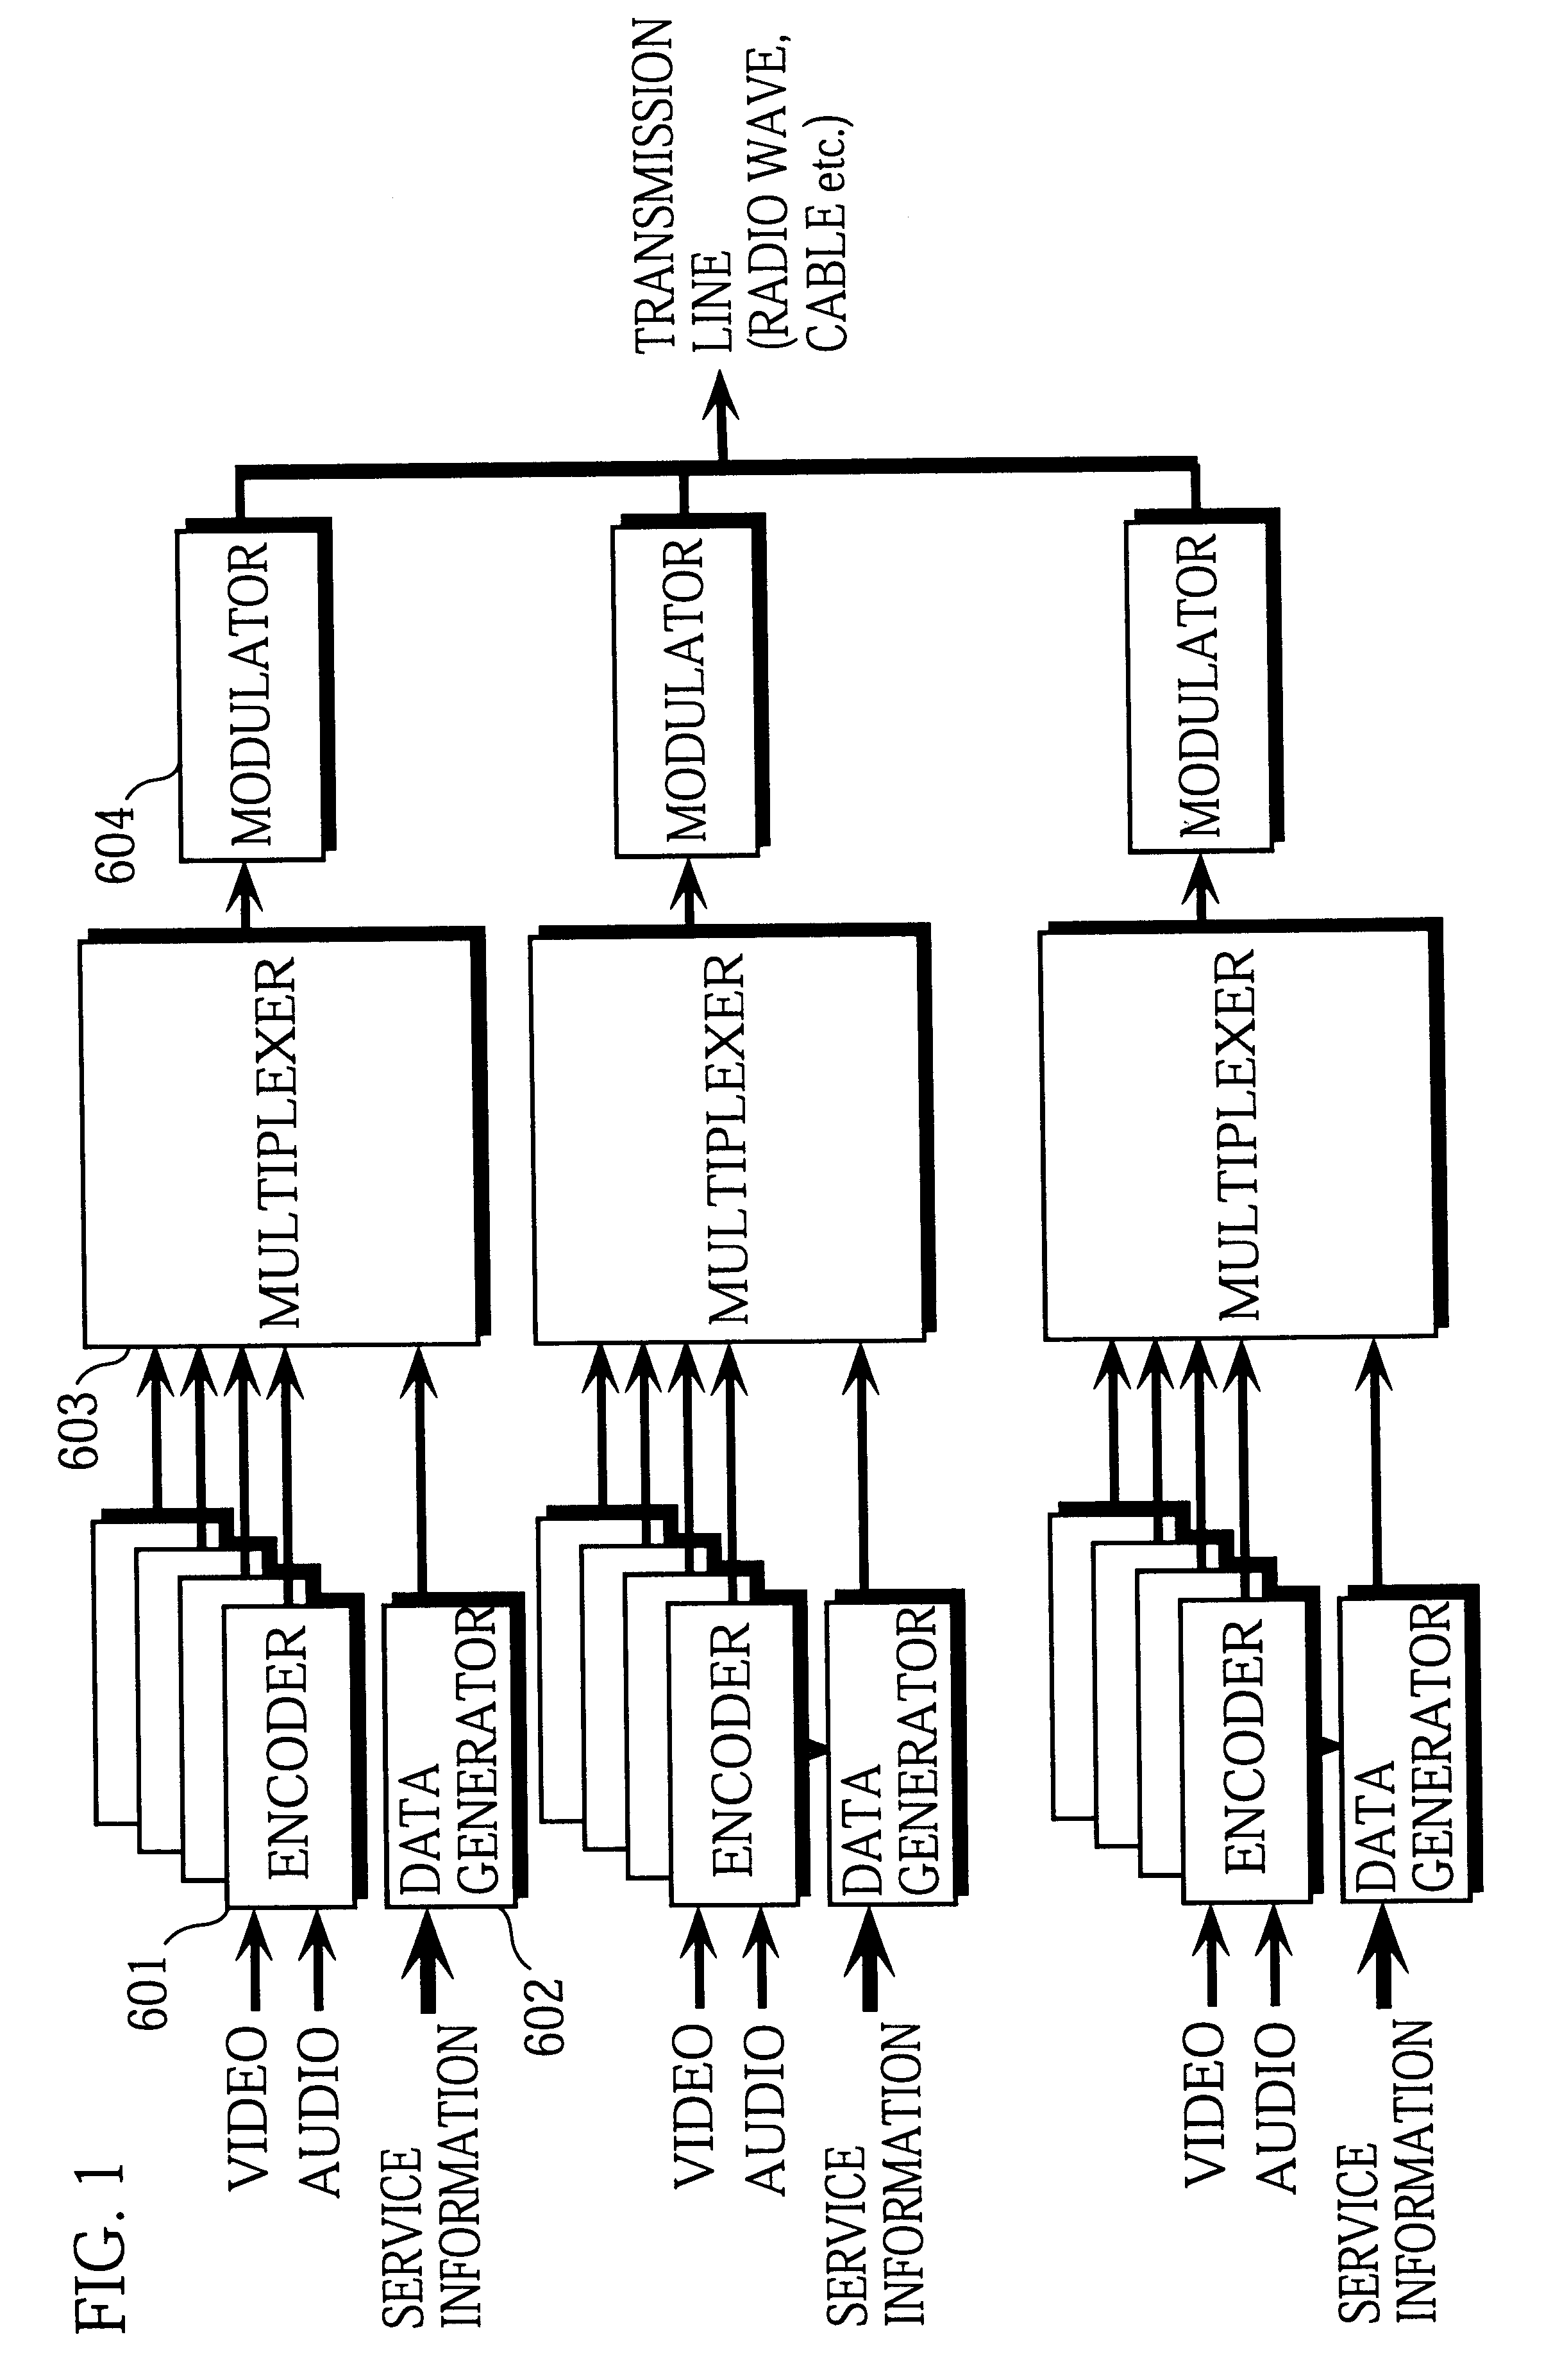 Control program downloading method for replacing control program in digital broadcast receiving apparatus with new control program sent from digital broadcast transmitting apparatus